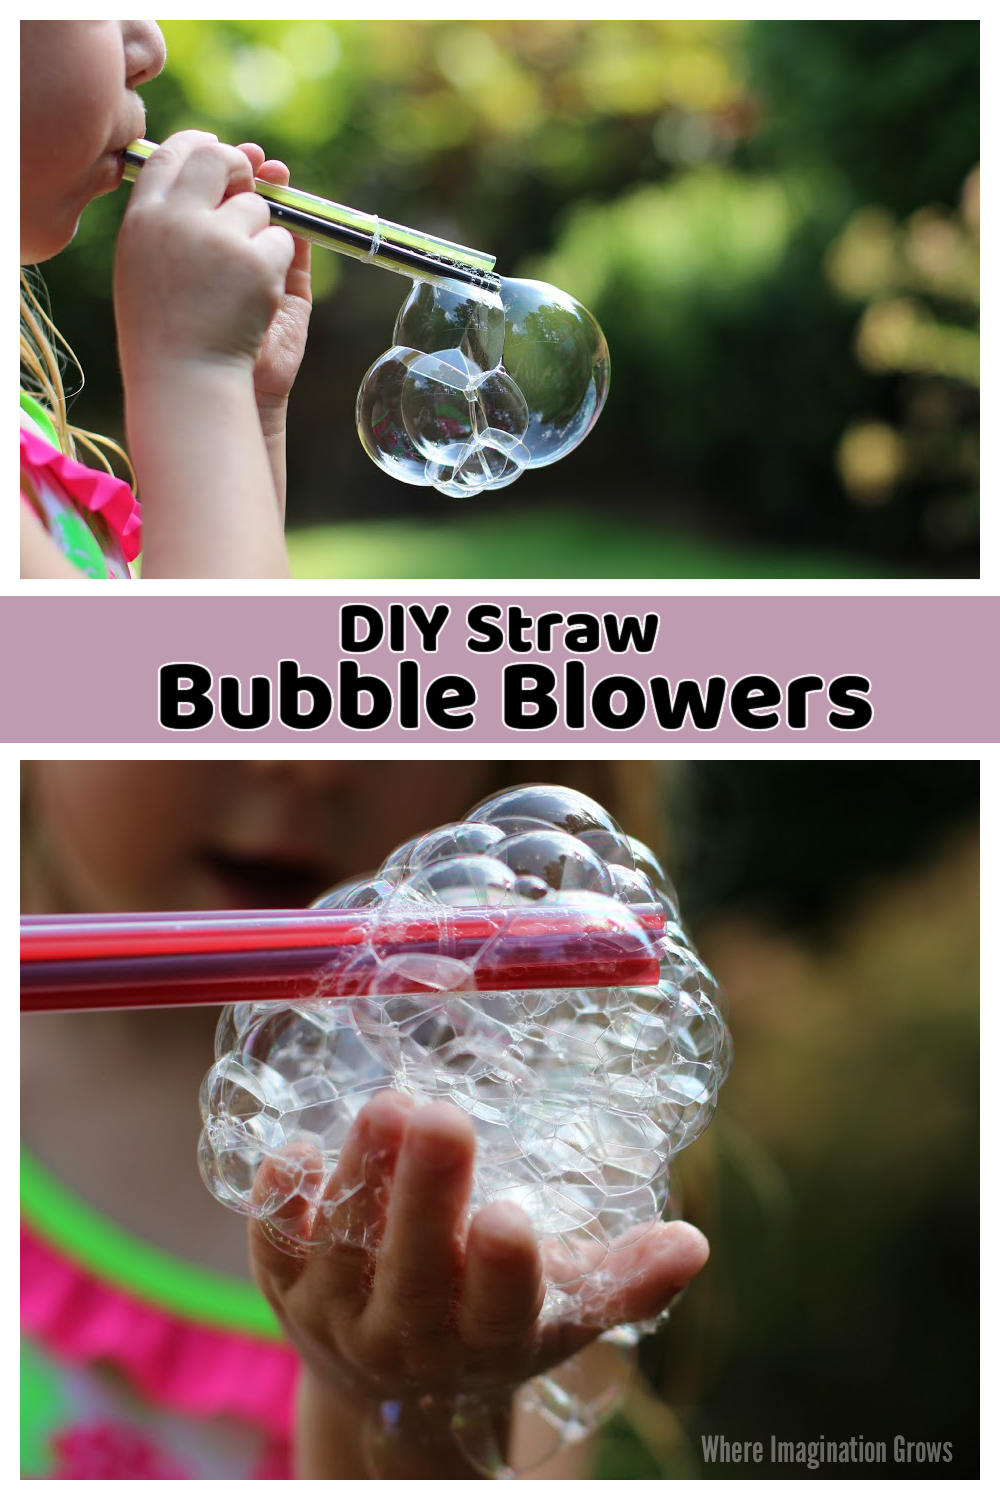 Images showing child using straws to blow bubbles